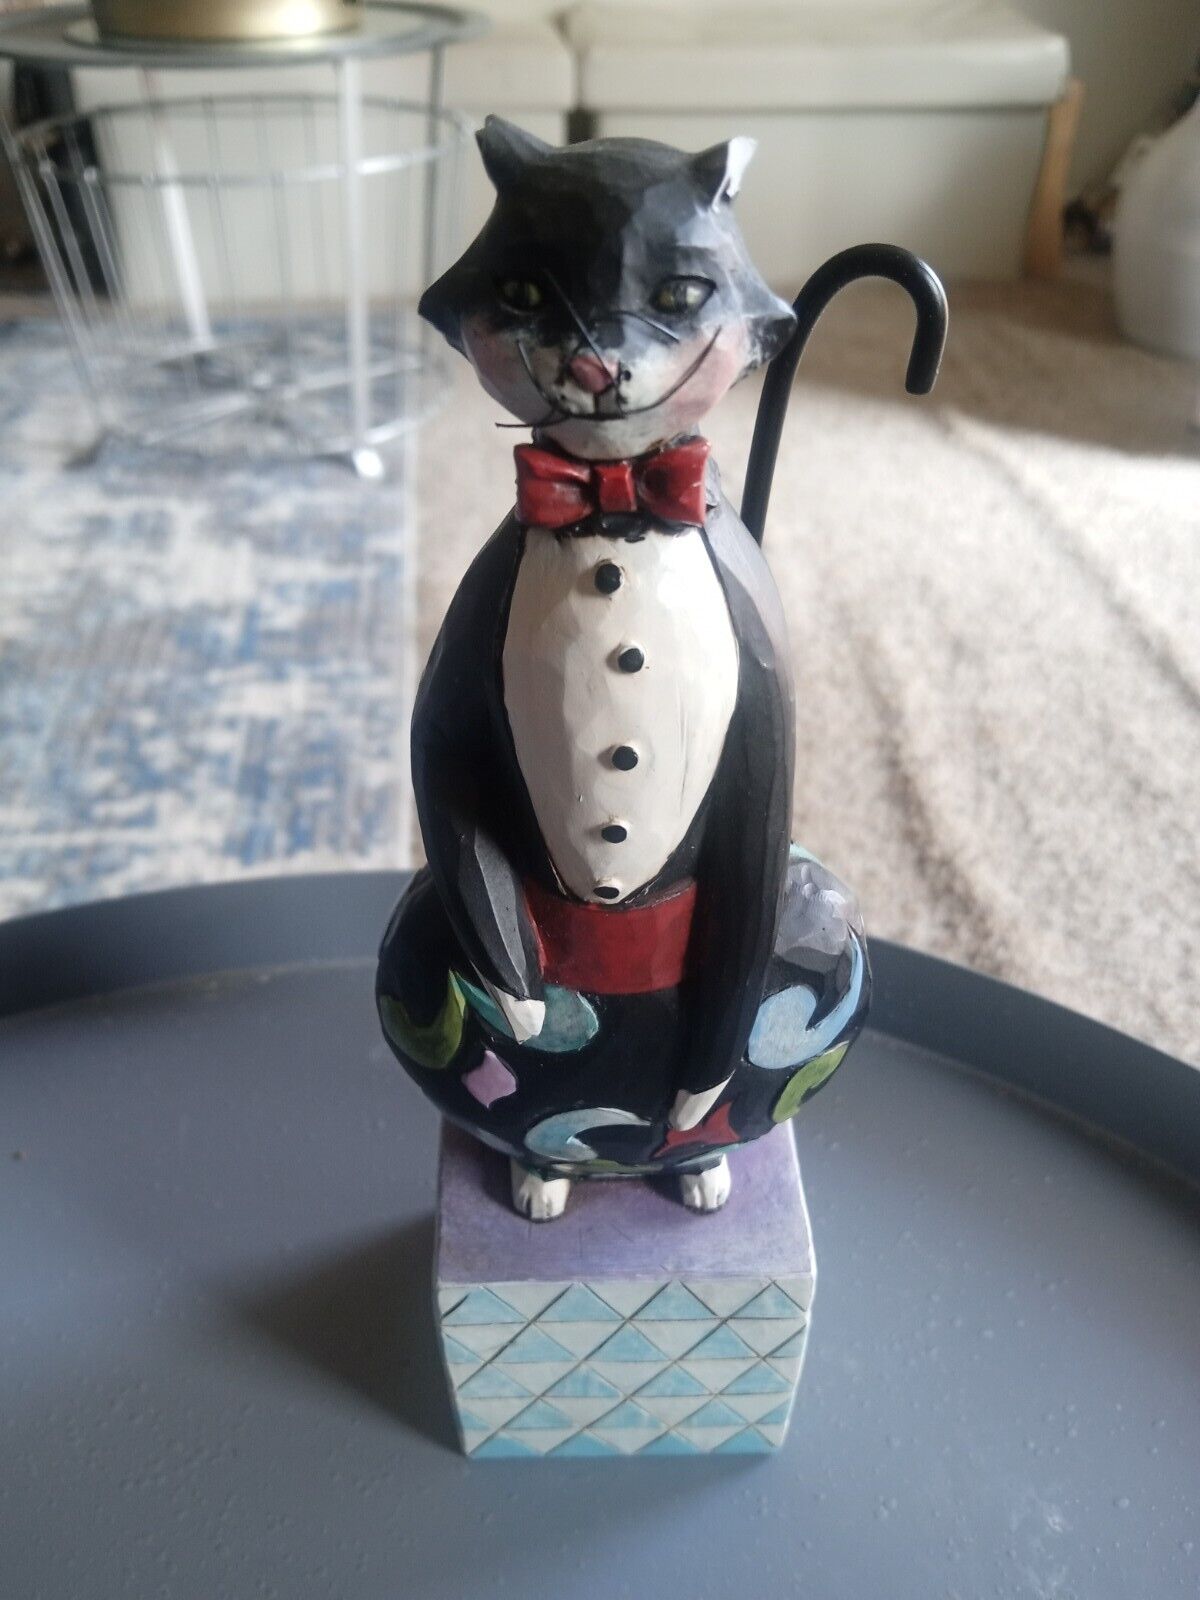 2009 jim shore tuxedo cat figure Alfred with cane standing on pyramid design 